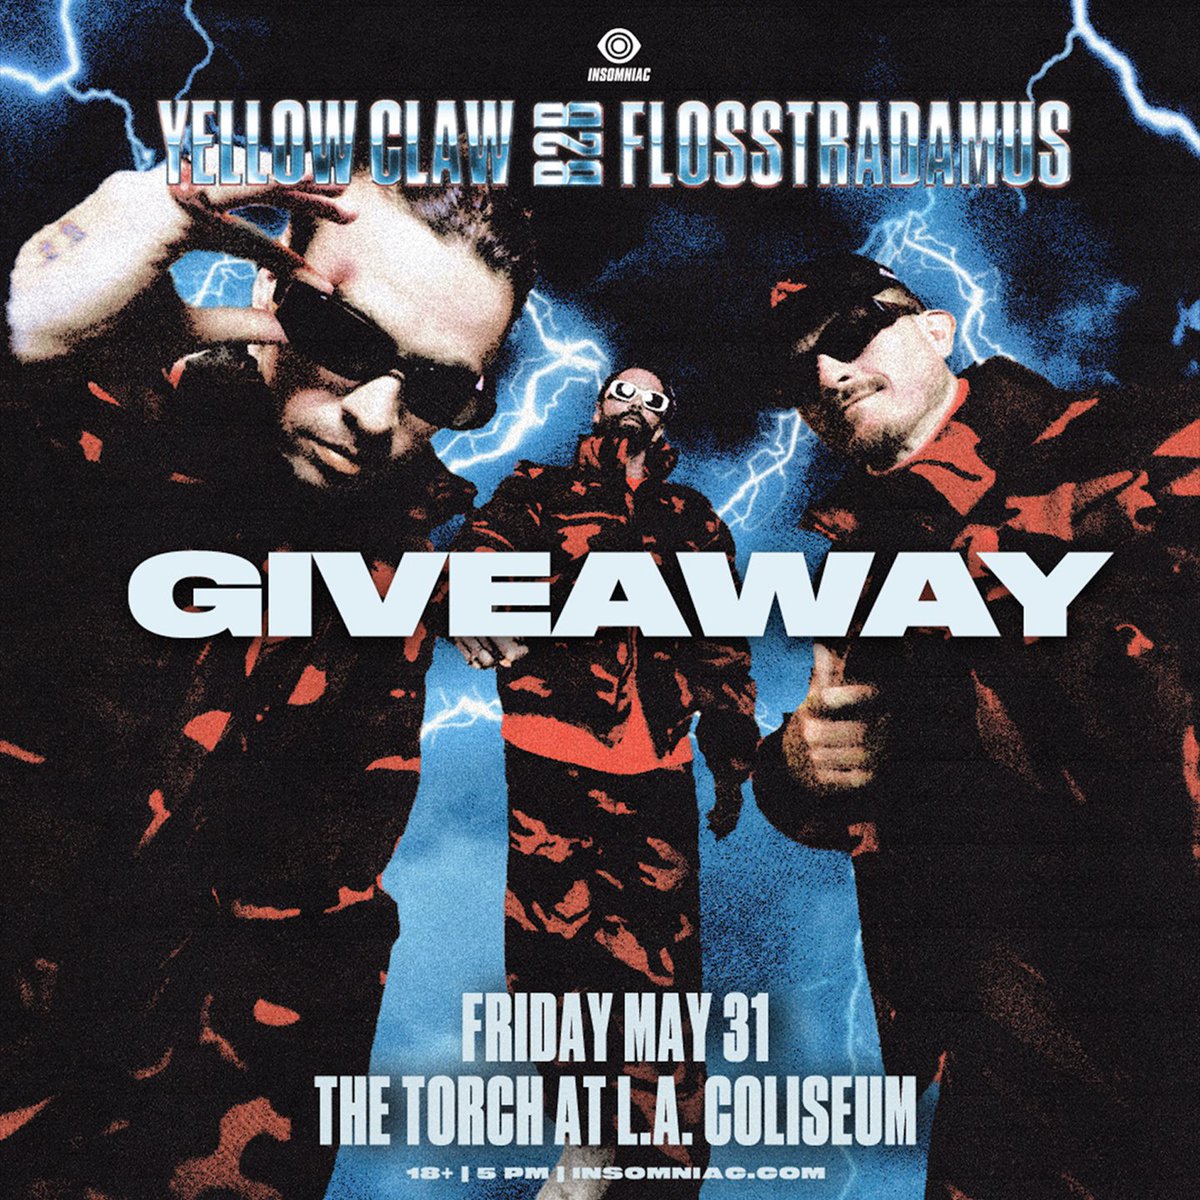 We're giving away a pair of tickets to Yellow Claw b2b Flosstradamus at The Torch on Friday, May 31 - visit our Instagram page to enter! Contest ends 5/21 at 11:59pm PST: instagram.com/thetorchla/